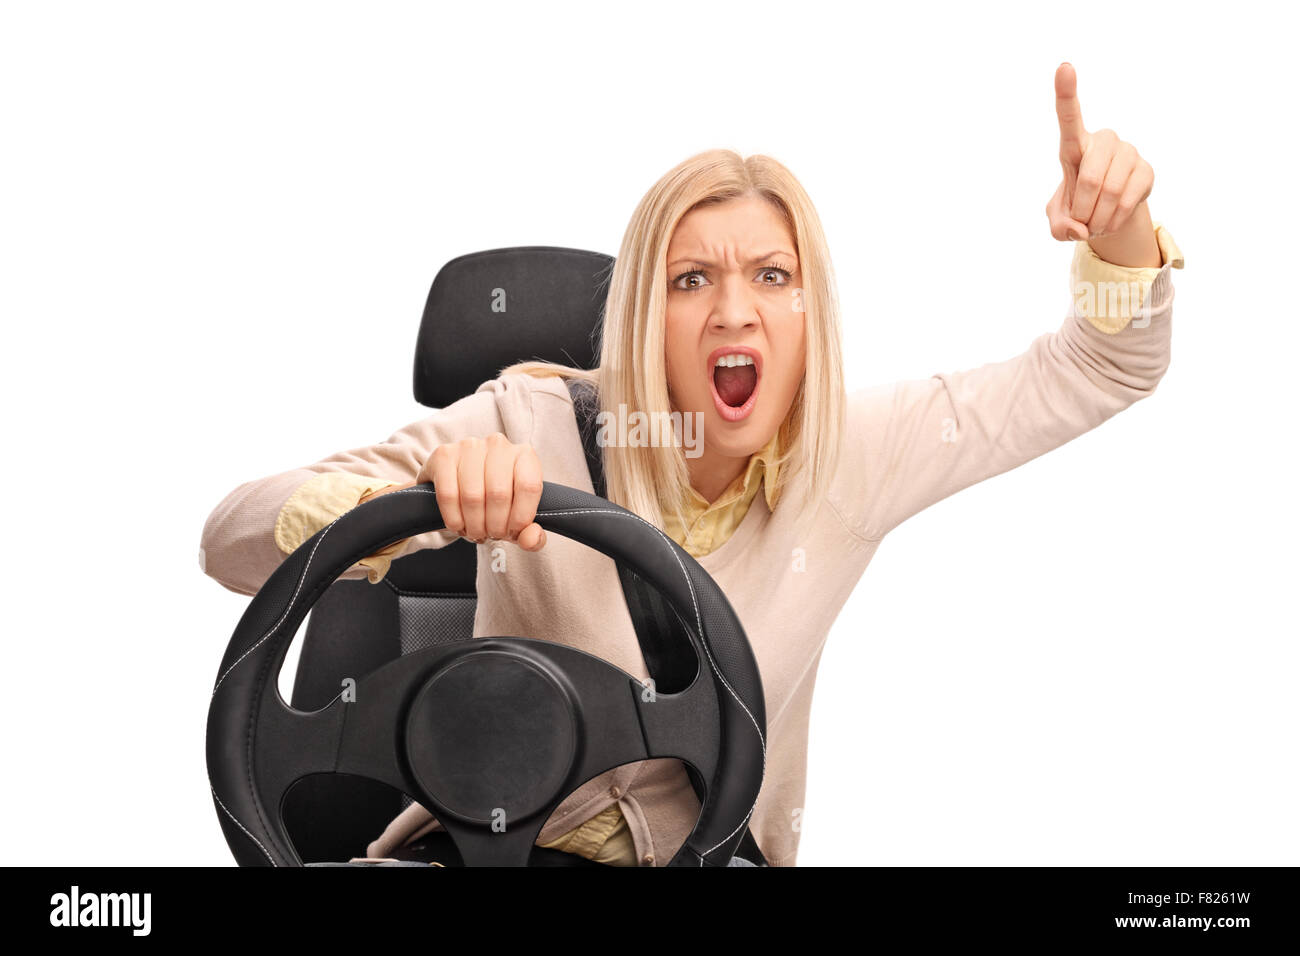 Angry woman pretending to drive and shouting towards the camera isolated on white background Stock Photo